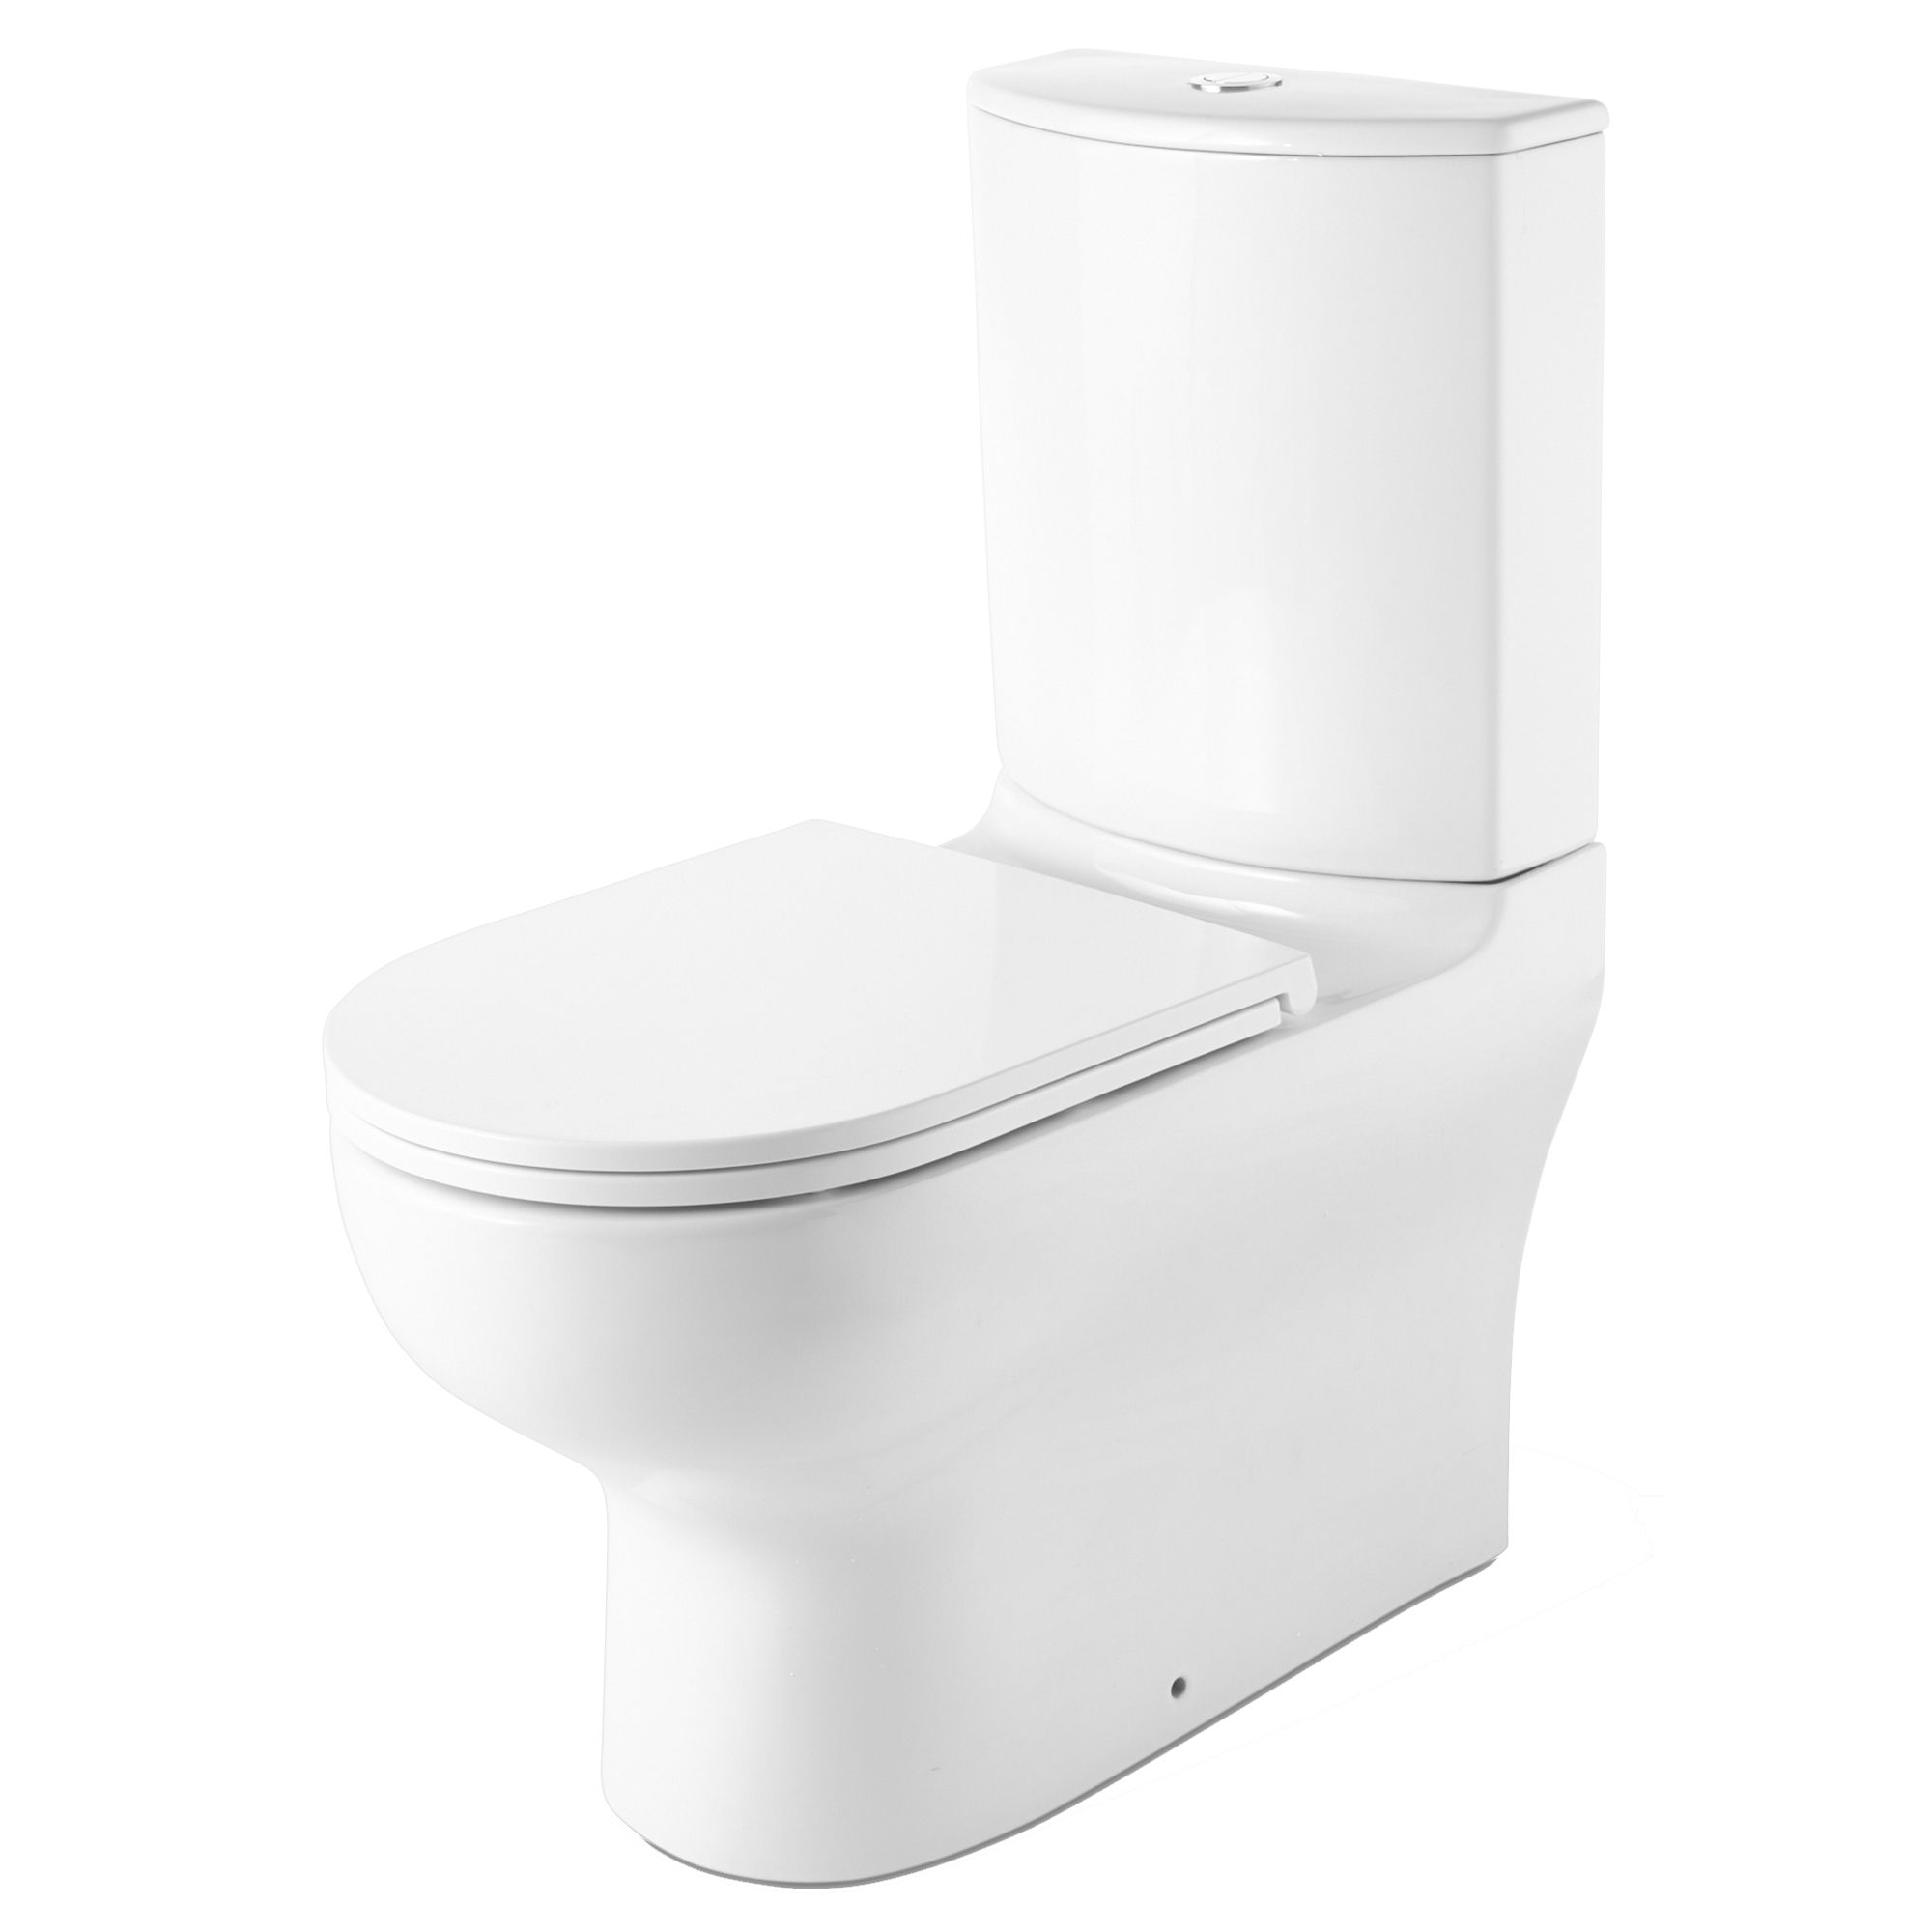 GoodHome Cavally White Closed back close-coupled Floor-mounted Toilet & full pedestal basin (W)370mm (H)830mm